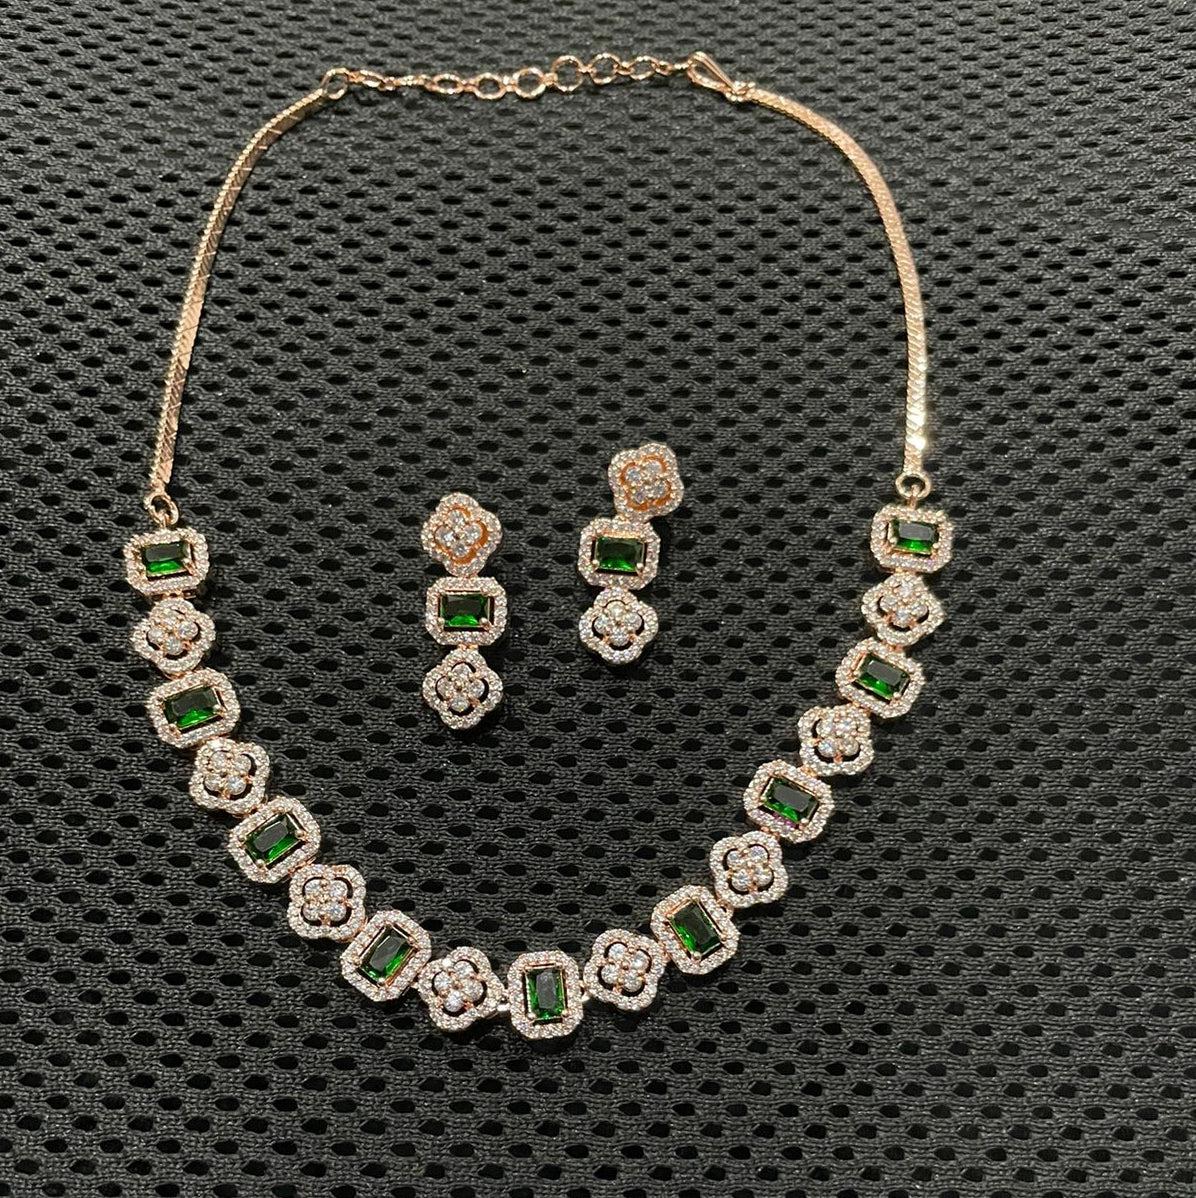 Premium Sayara Collection Rose Gold Plated Necklace set with Top quality CZ Stones 8816N-Necklace Set-season end sale item-Griiham